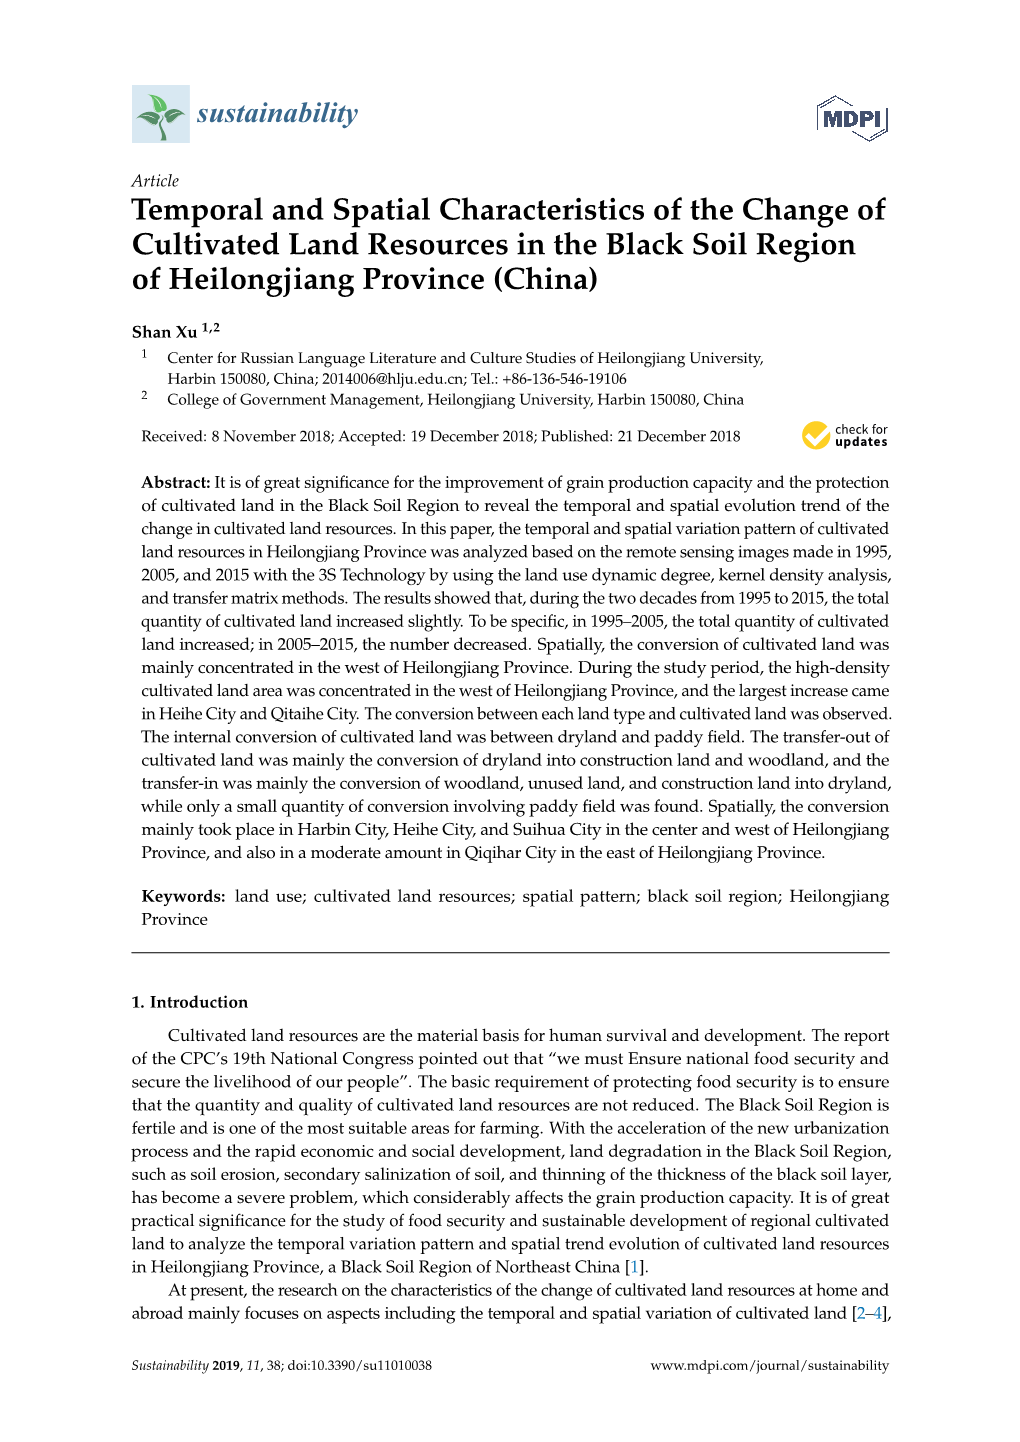 Temporal and Spatial Characteristics of the Change of Cultivated Land Resources in the Black Soil Region of Heilongjiang Province (China)